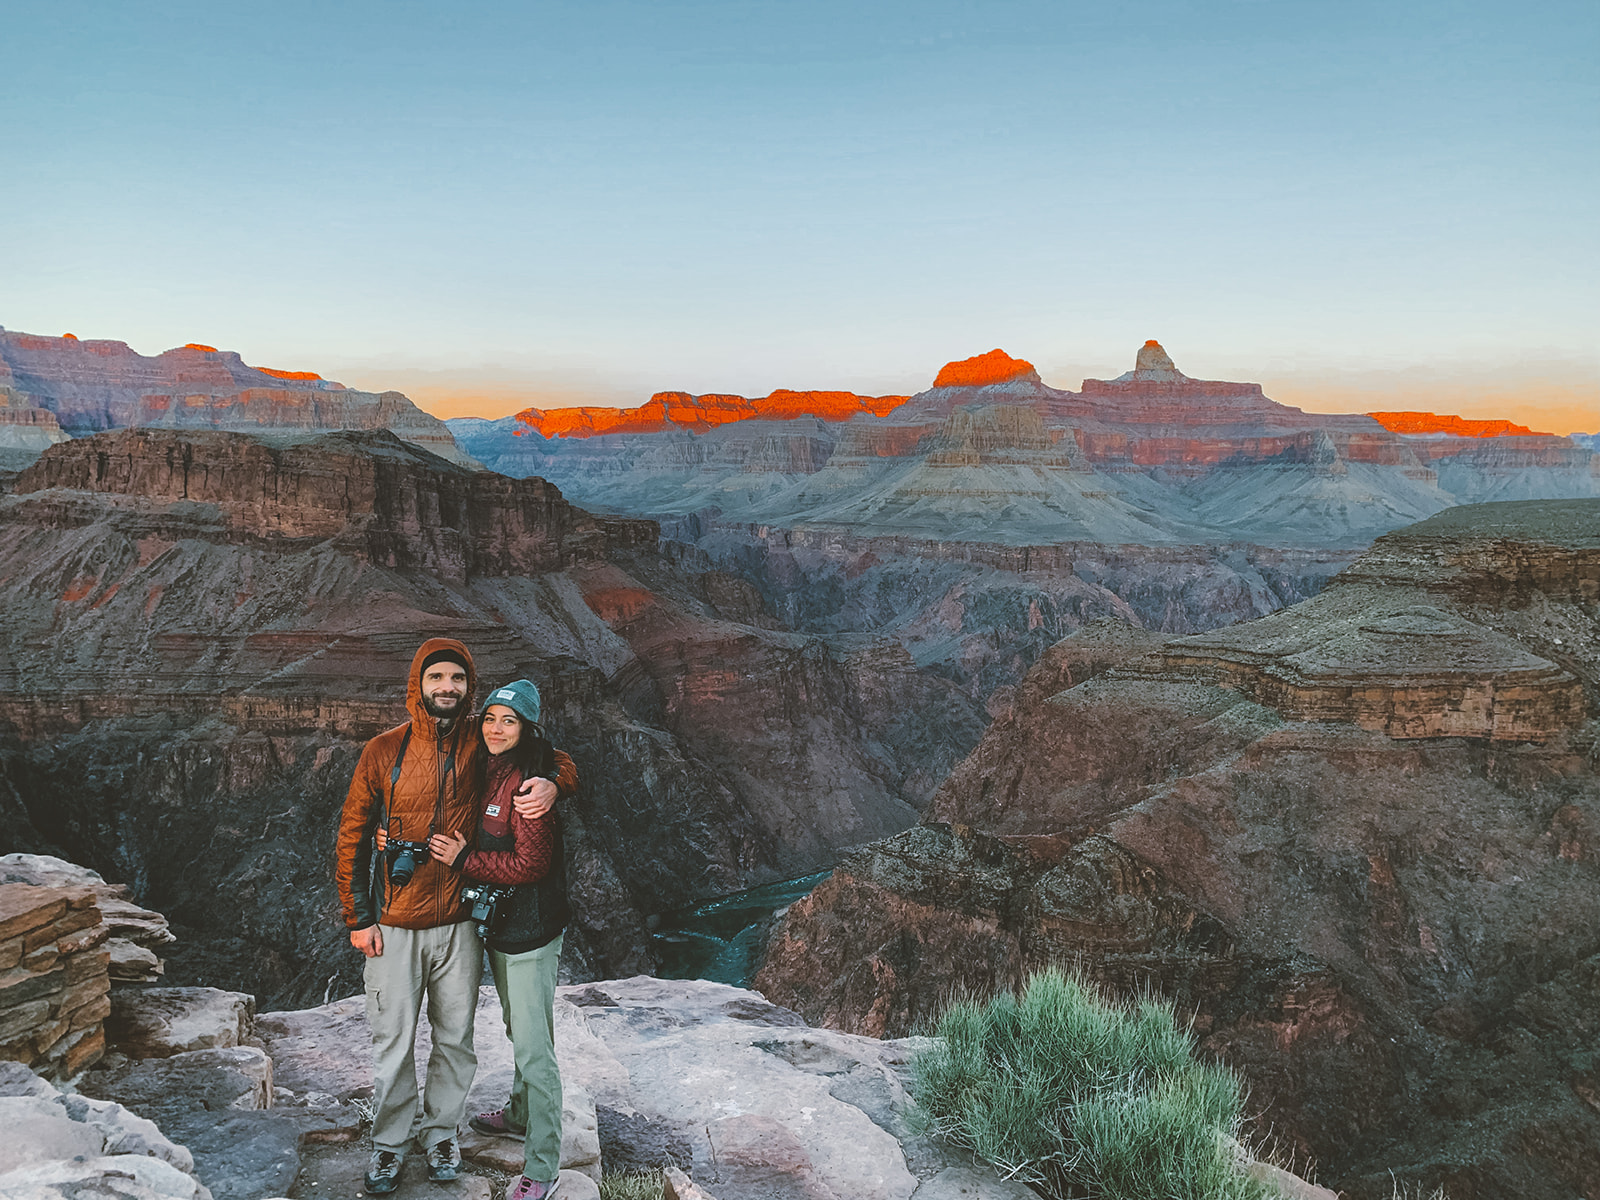 A girl and guy posing, arms wrapped around one another, smiling for the camera. The background is a scenic view of the Grand Canyon